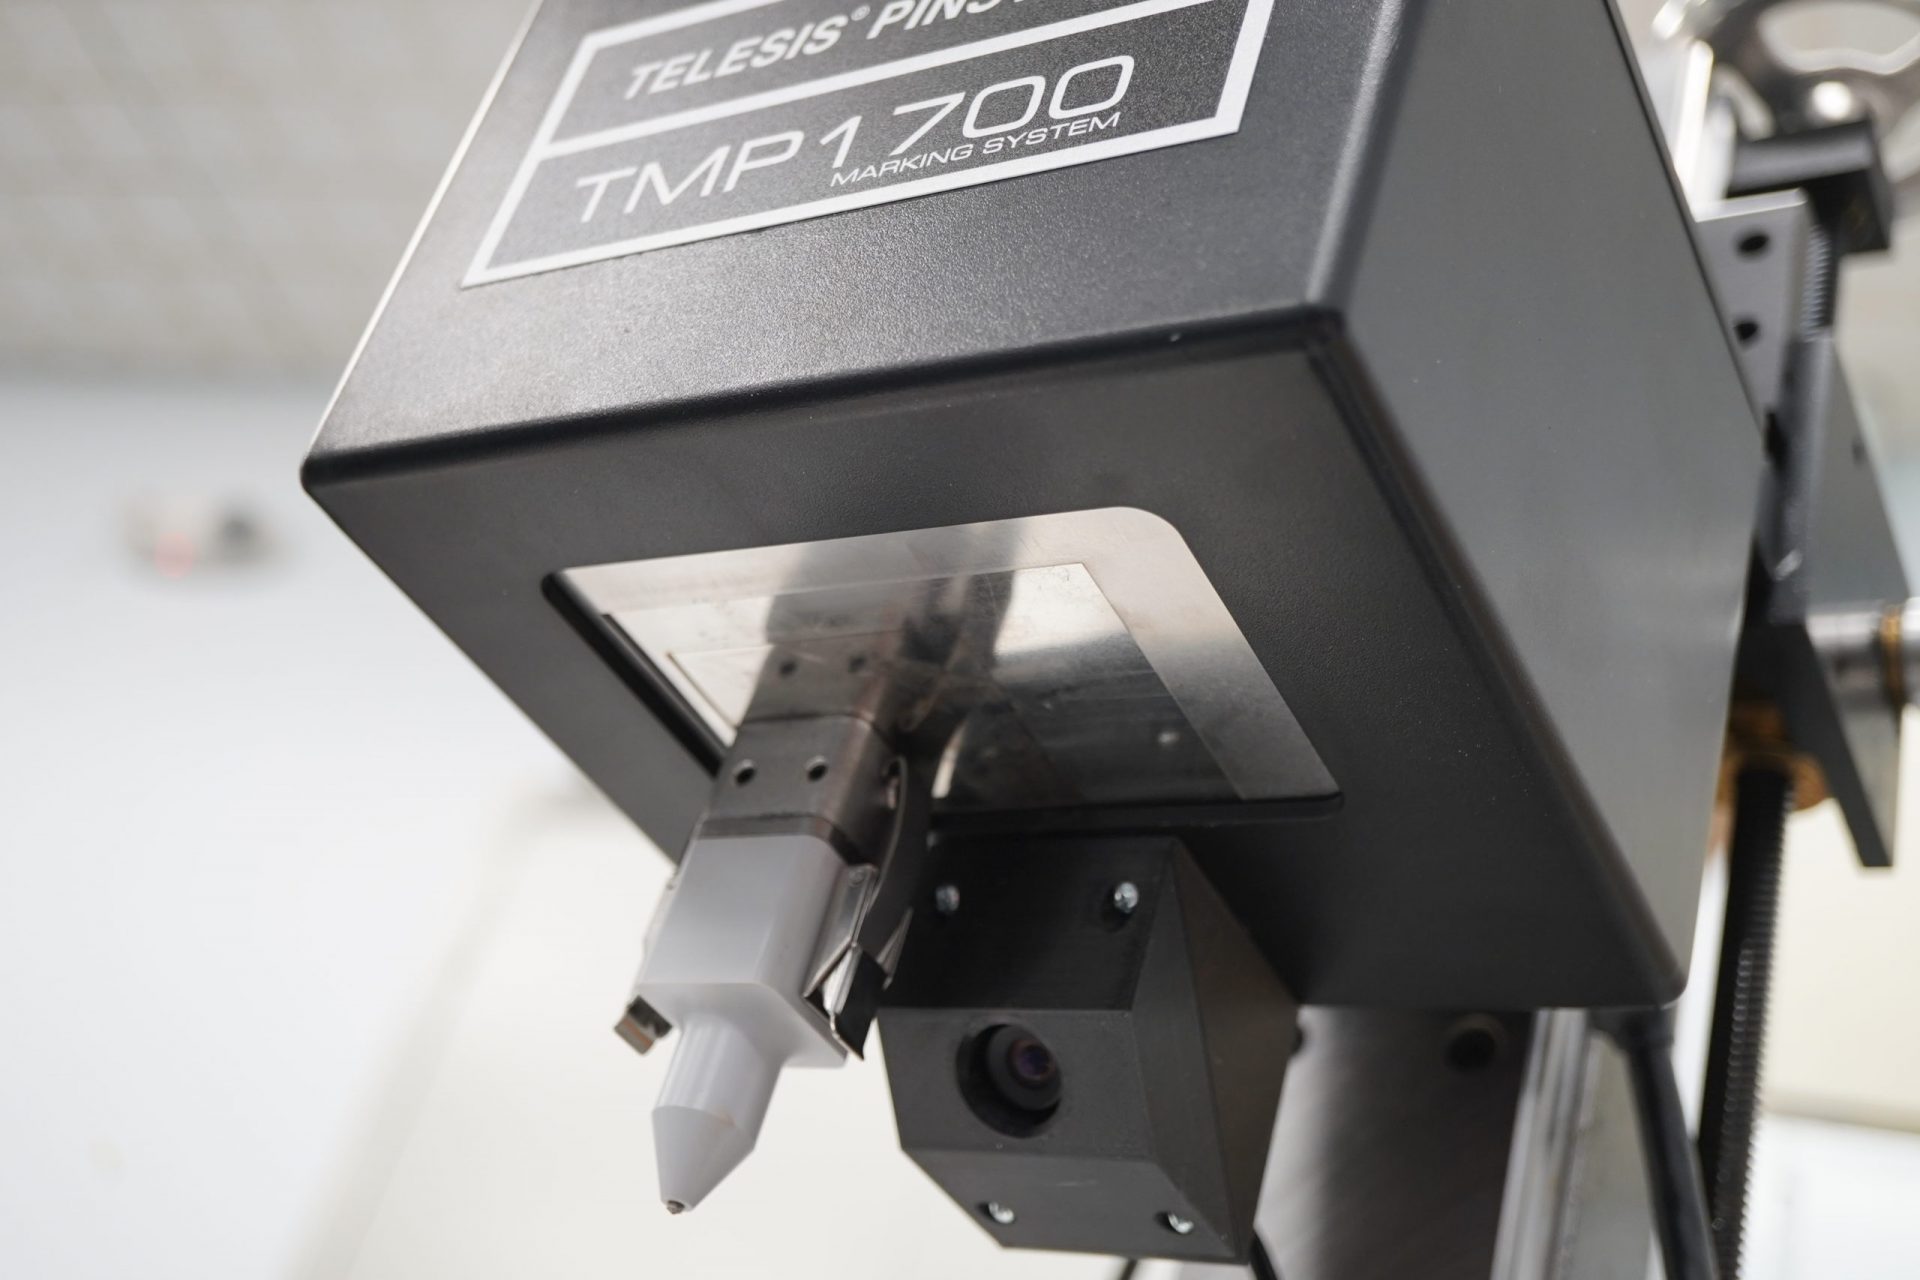 tmp1700 marking system